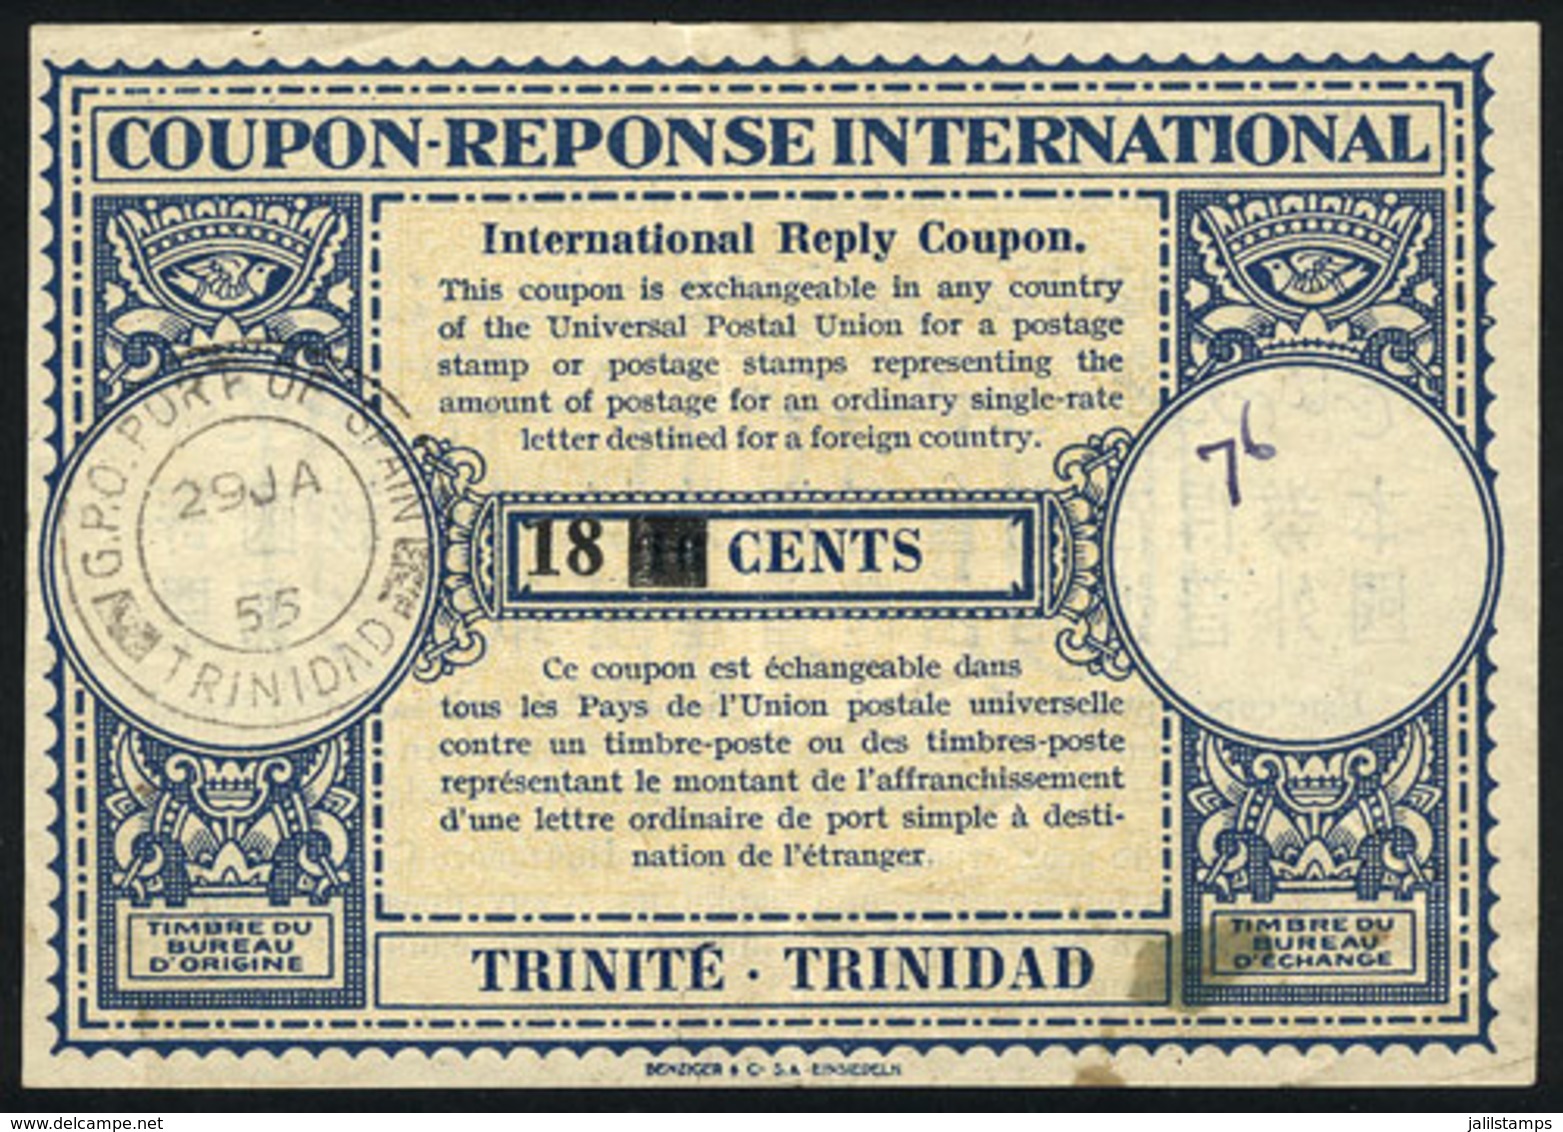 TRINIDAD: IRC Of 1955, With Postmark Of Port Of Spain, Tiny Defects, Interesting! - Trinidad & Tobago (1962-...)